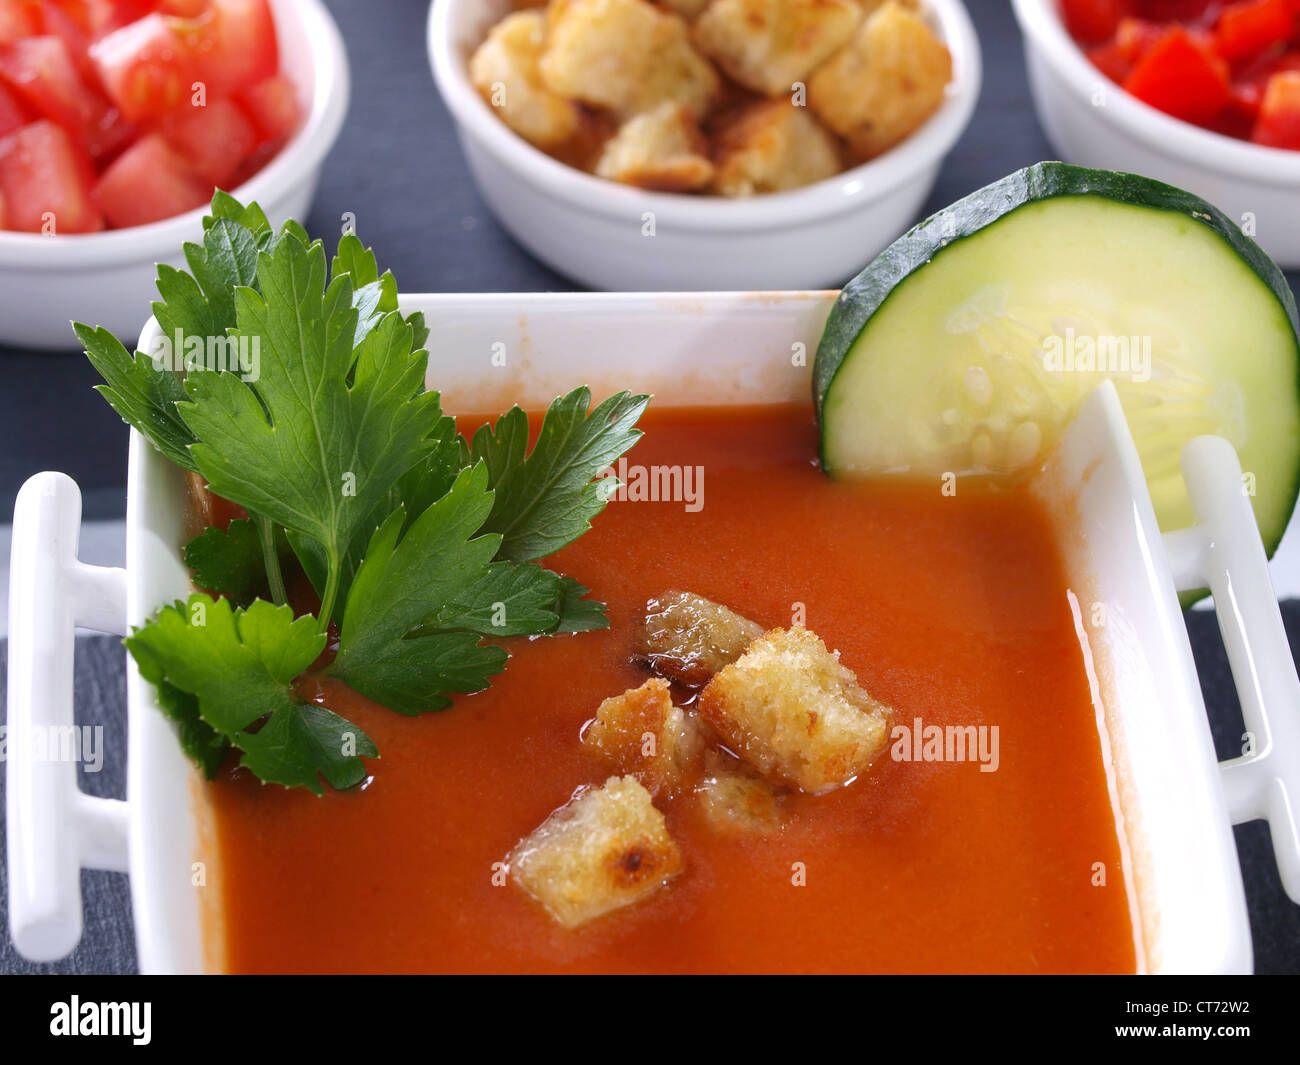 Gazpacho Andaluz. Is a raw vegetable soup native from the Spanish region Andalucia. It is served cold as starter. Stock Photo